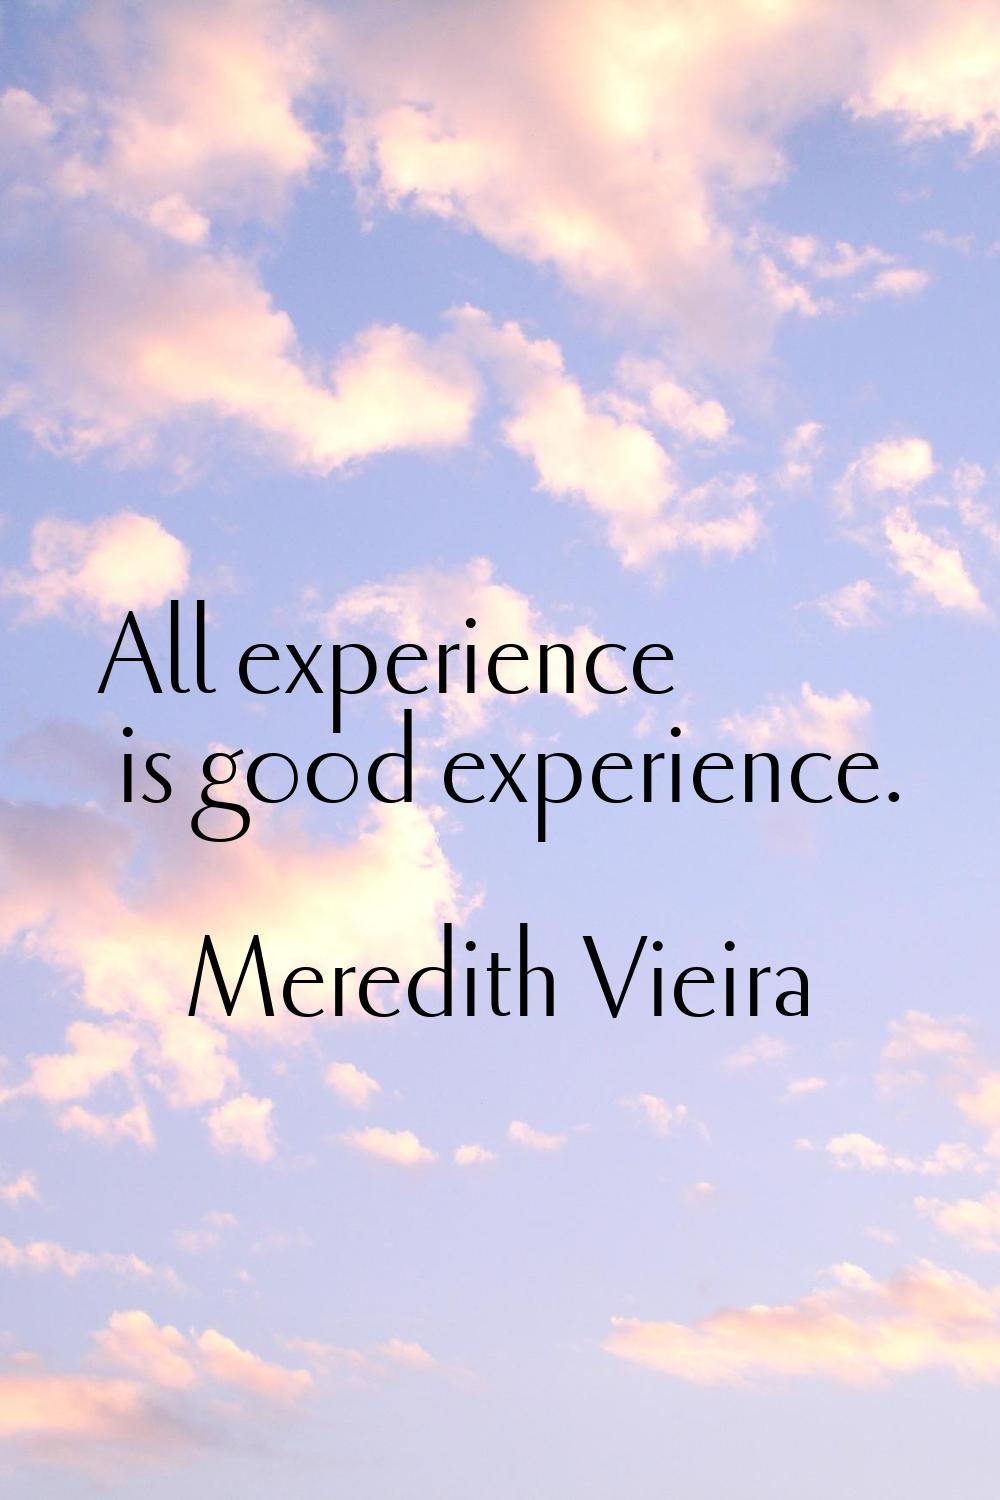 All experience is good experience.